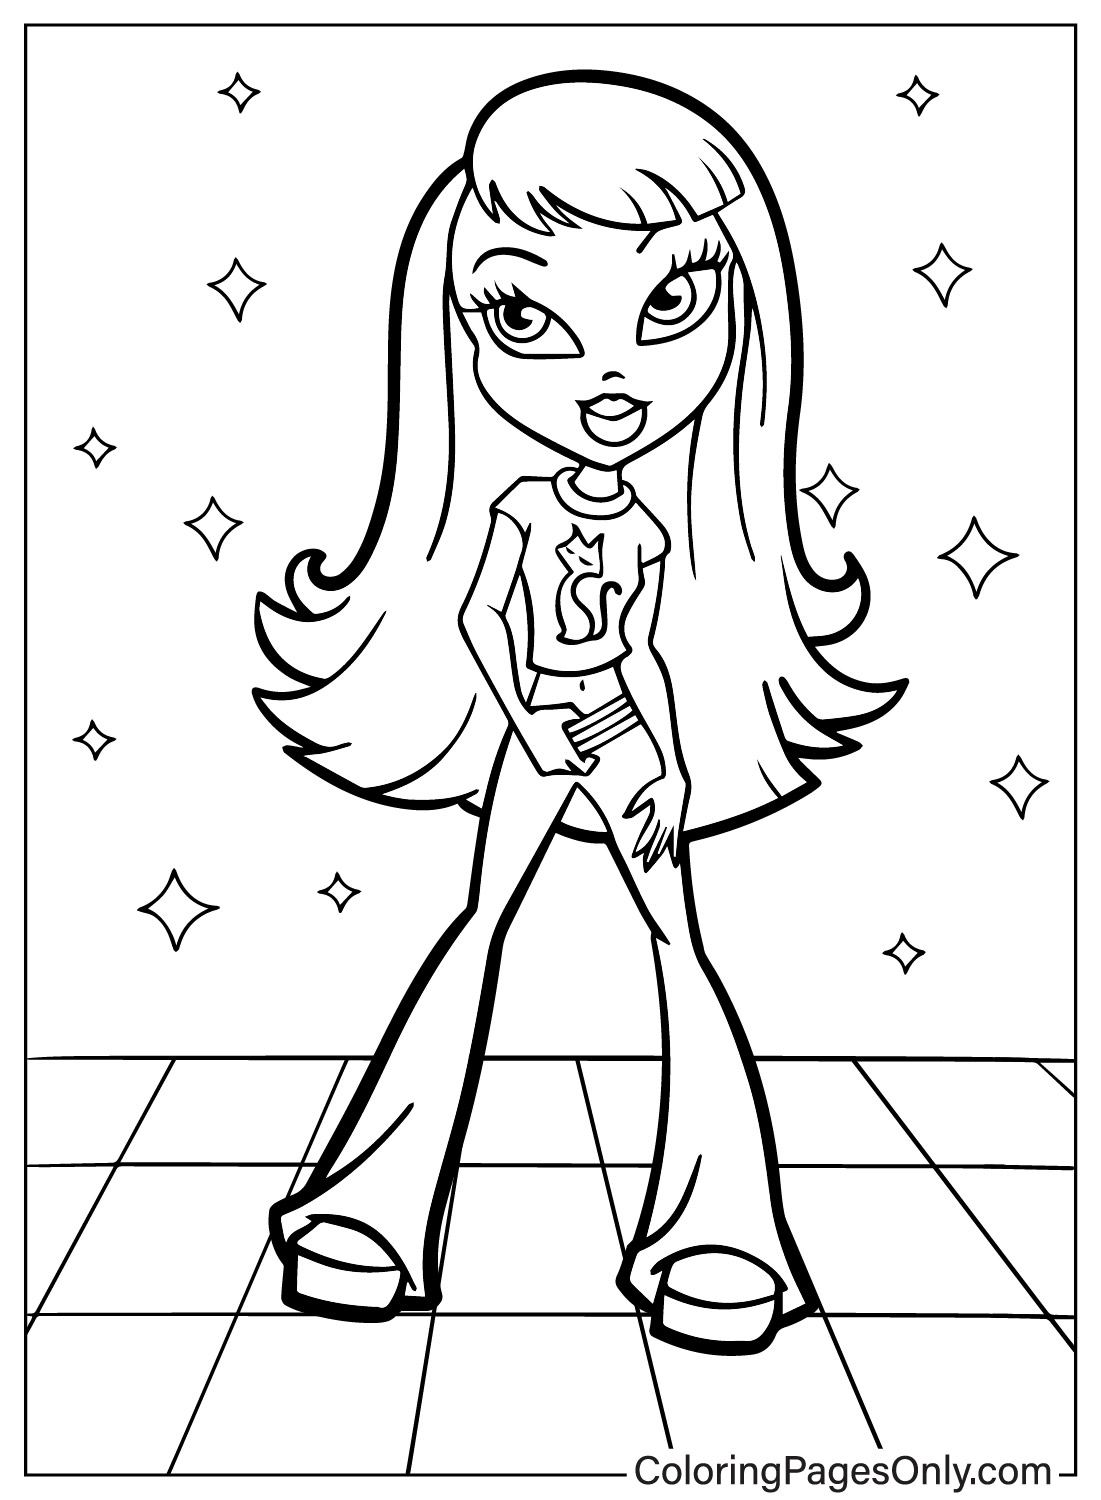 Coloring Pages Only on X: 🎀 Immerse yourself in the world of